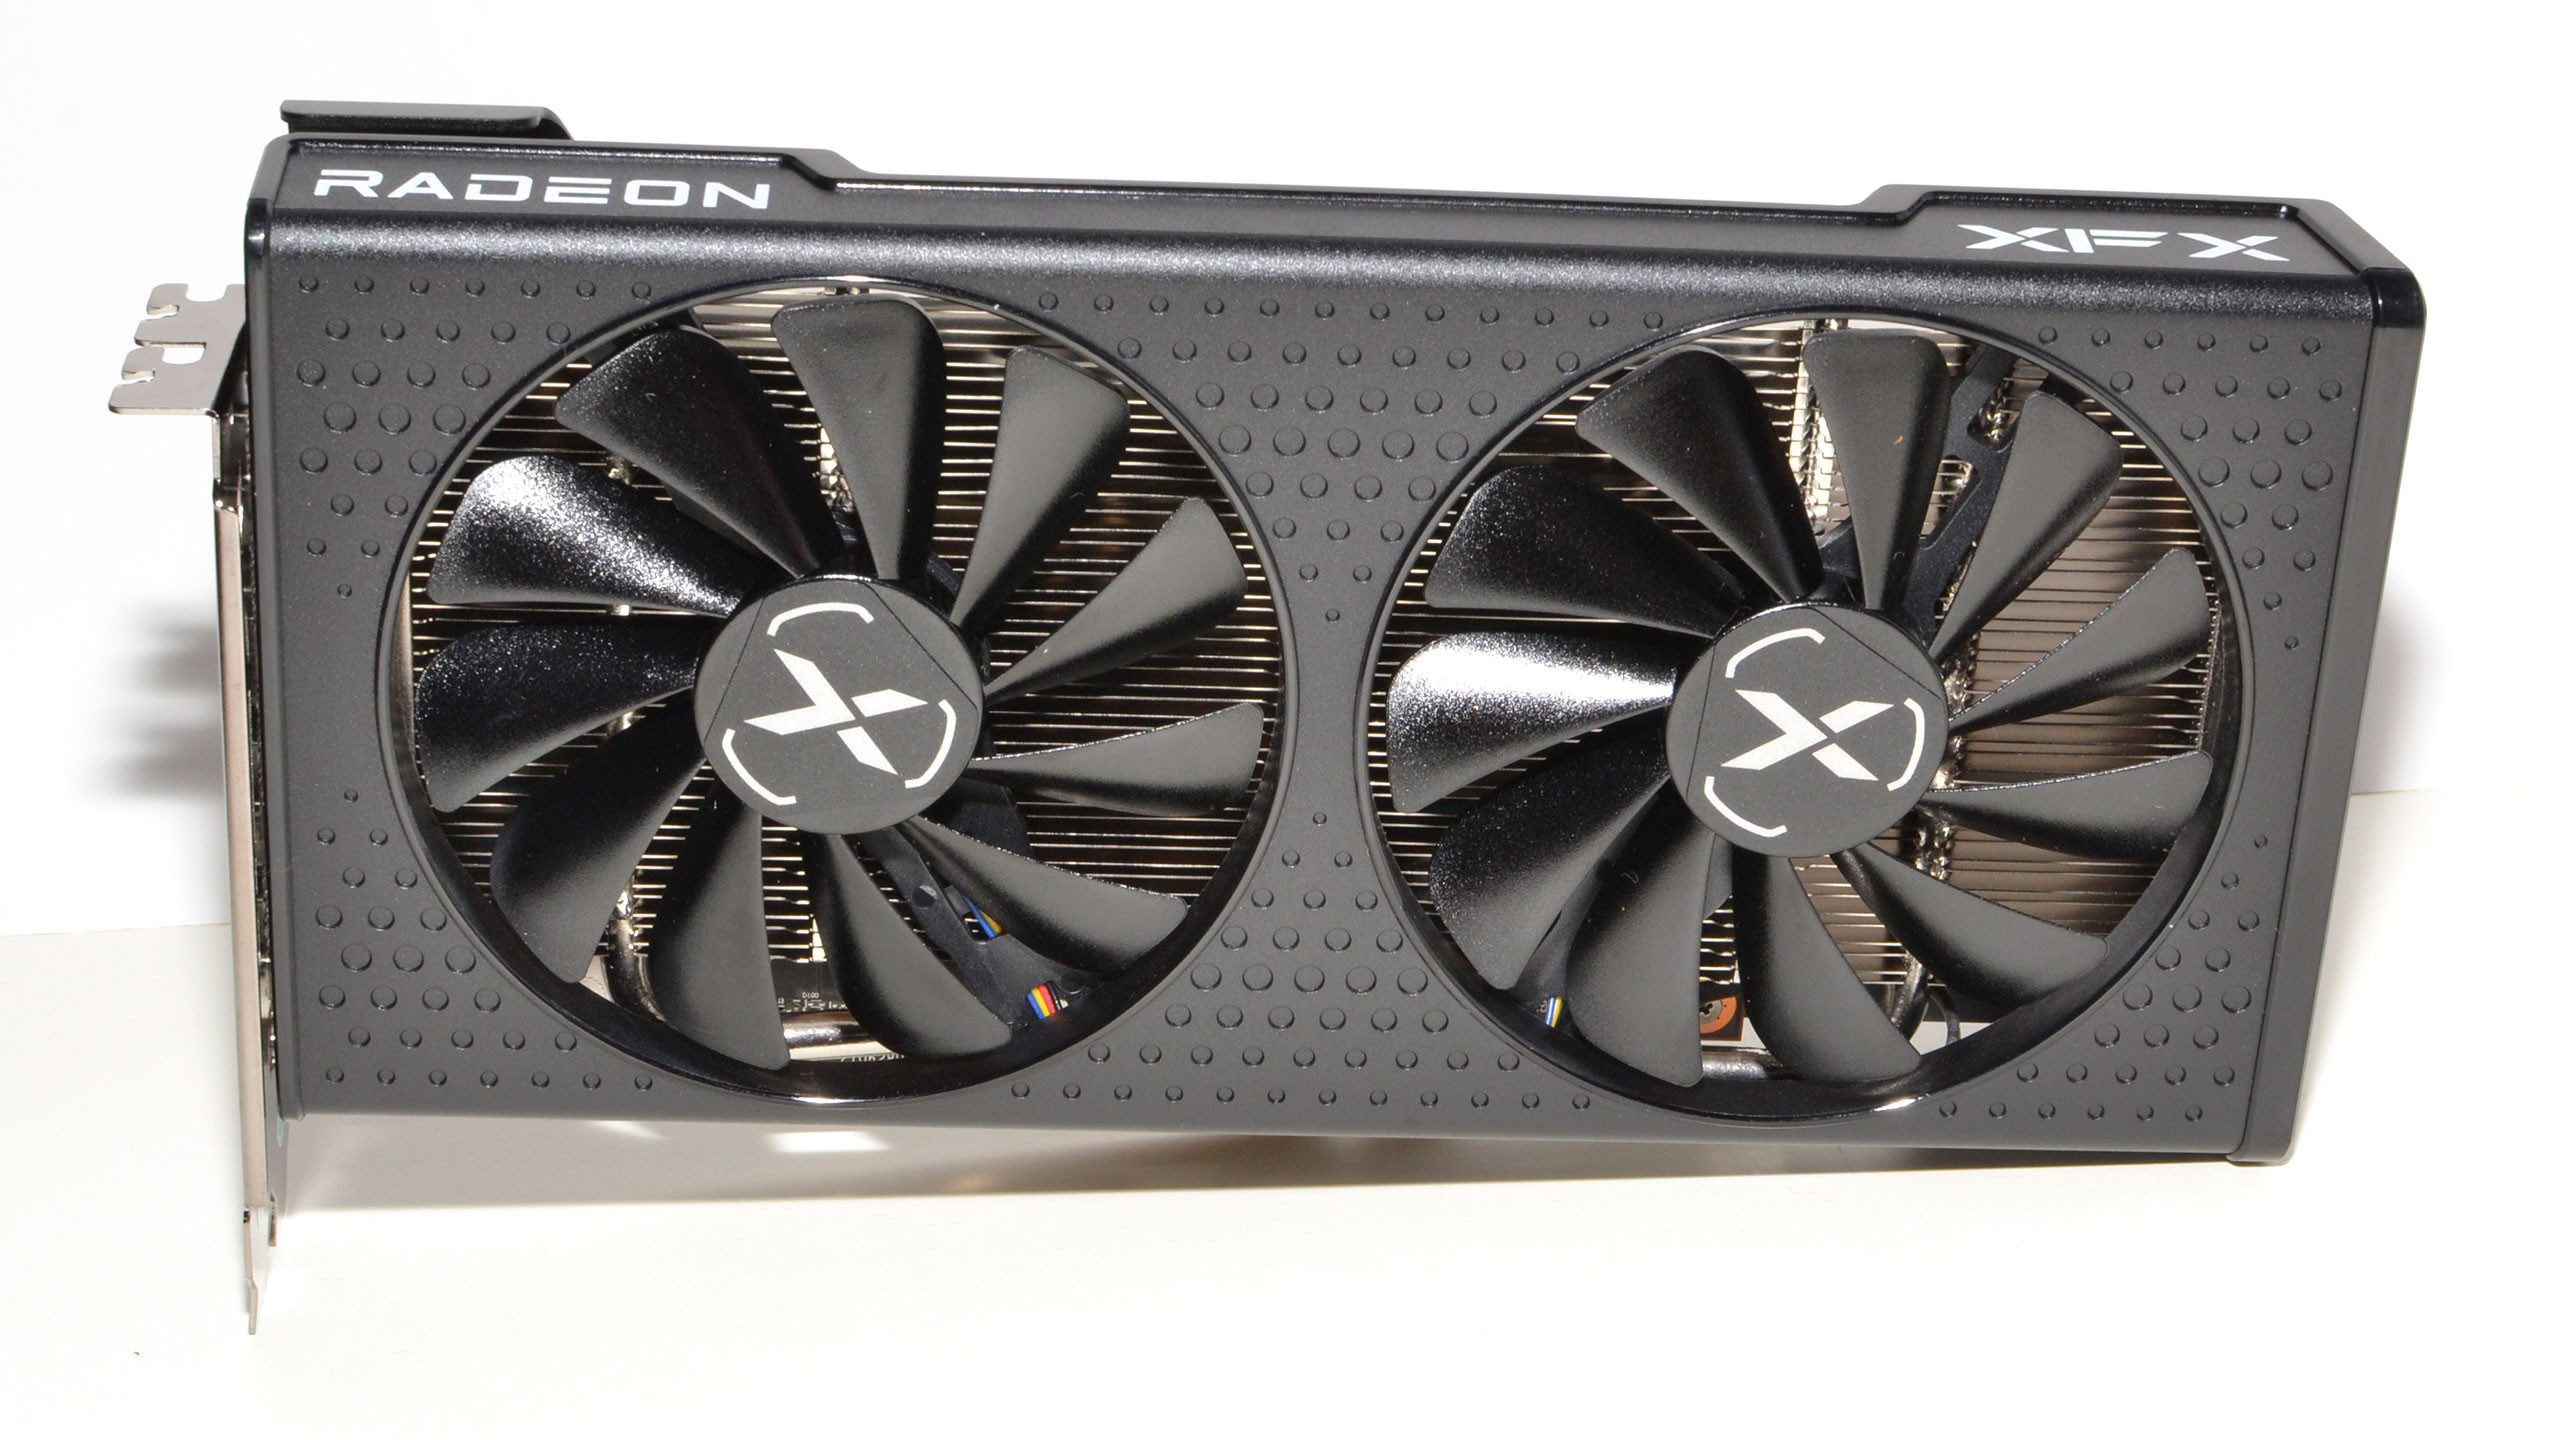 AMD Radeon RX 6600 Review - Great for 1080p Gaming